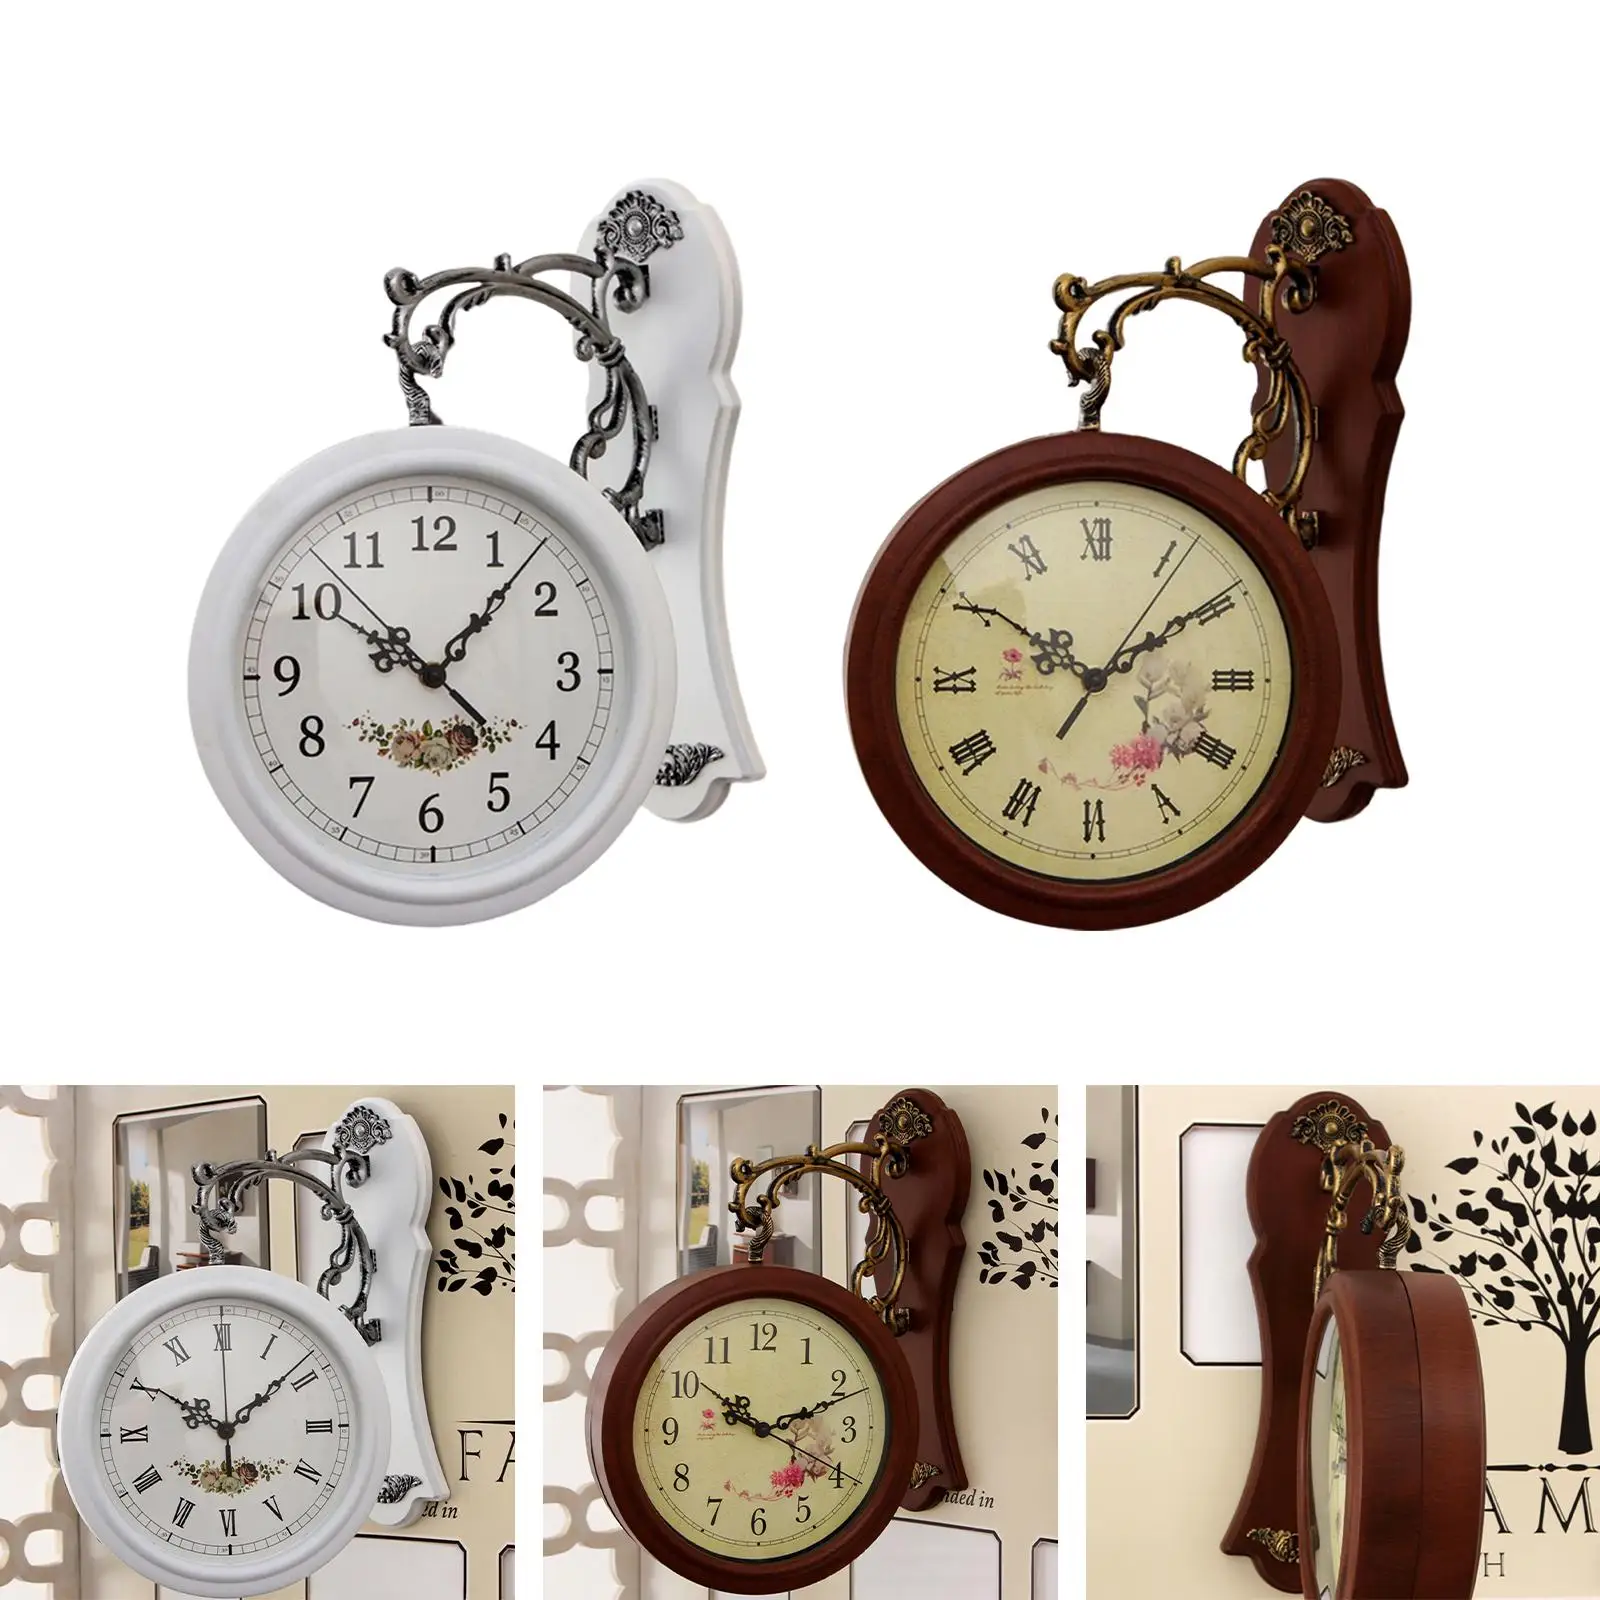 Double Sided Wall Clock Hanging Clocks Art Clock Decorative Two Faces Clock Grand Central Station Clocks for Living Room Study